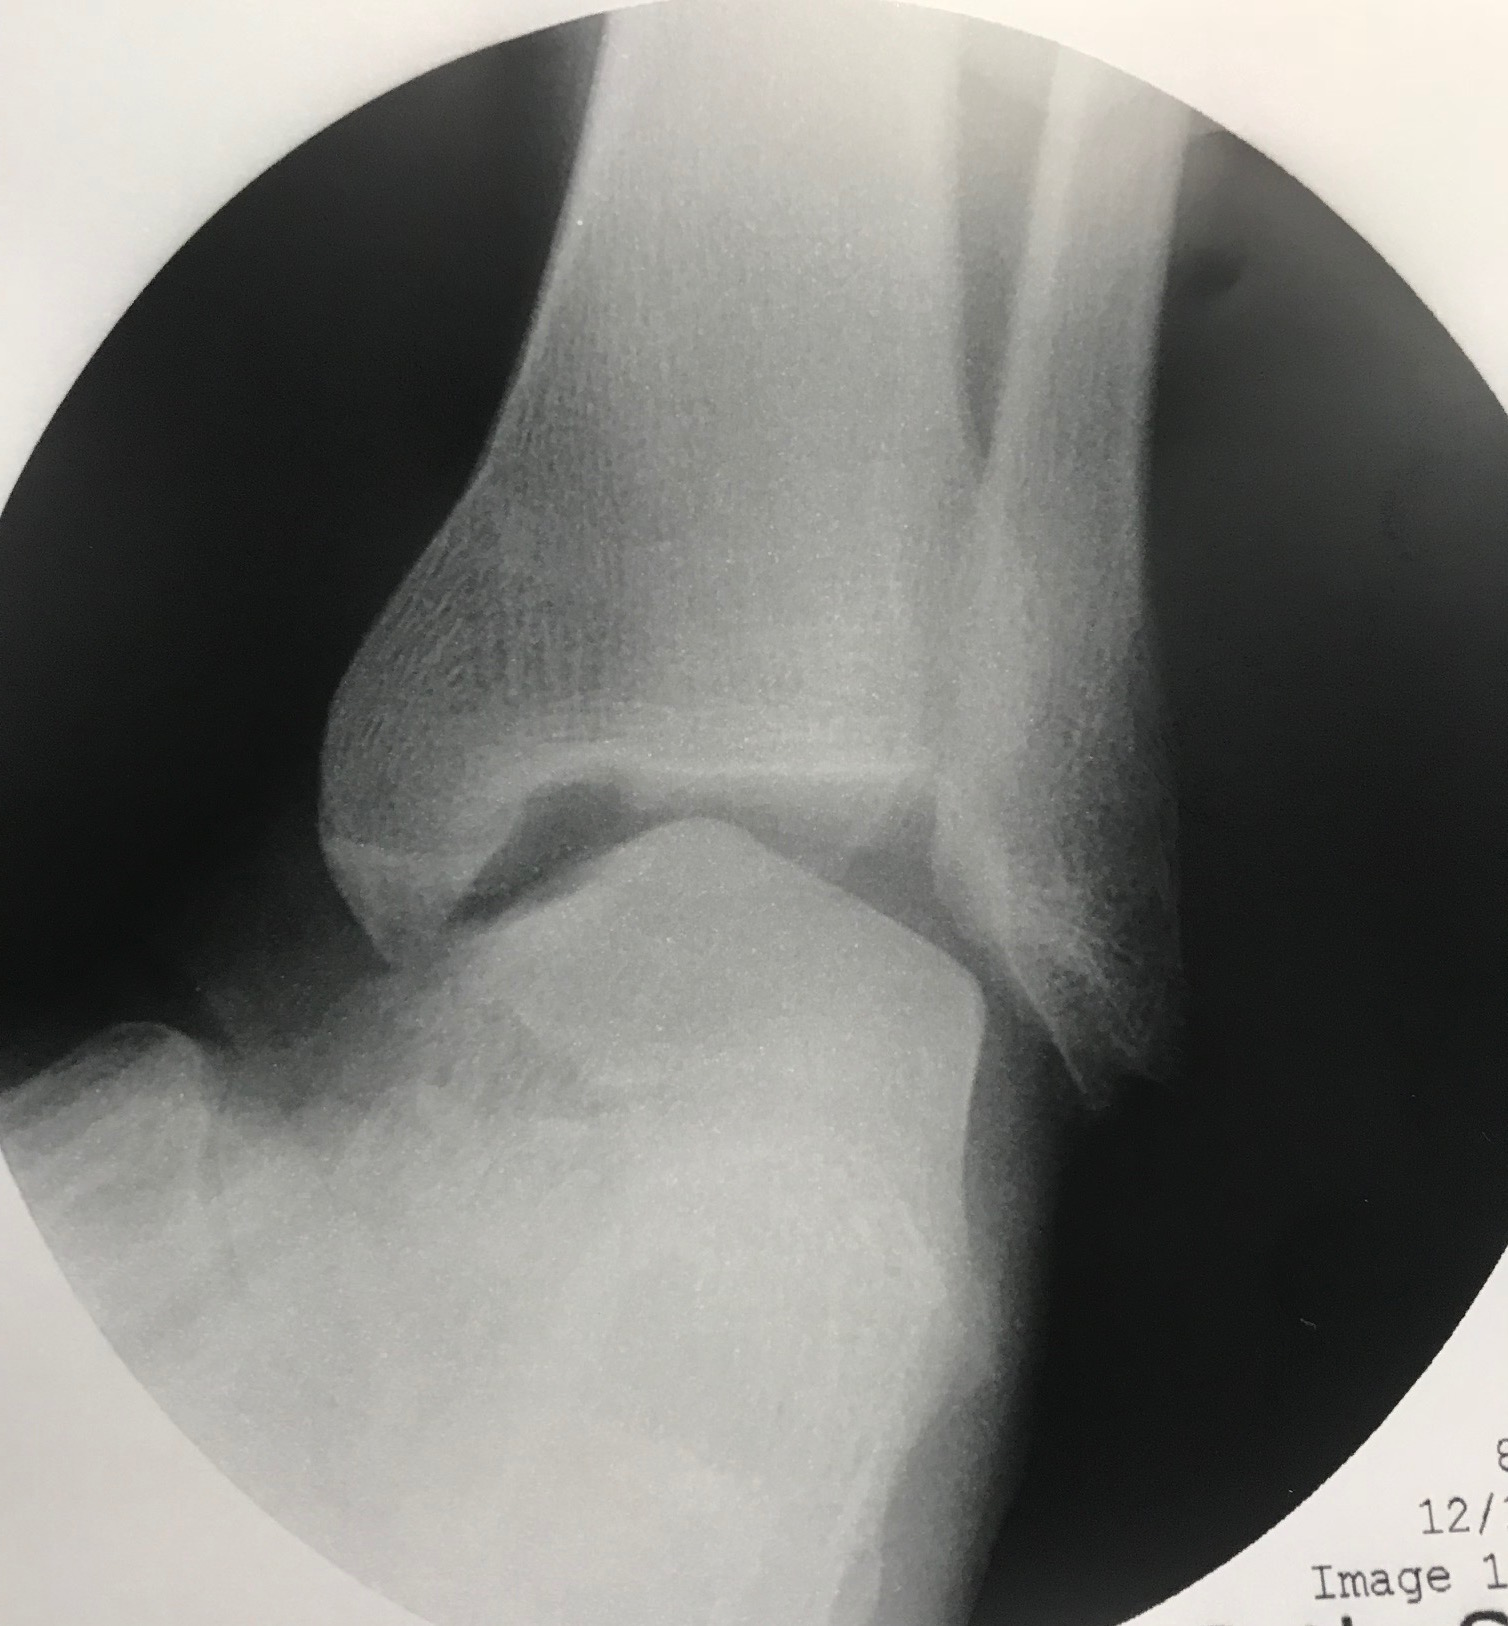 An ankle stress radiograph under live fluoroscopy showing lateral ankle instability with nearly a 40-degree talar tilt angle.